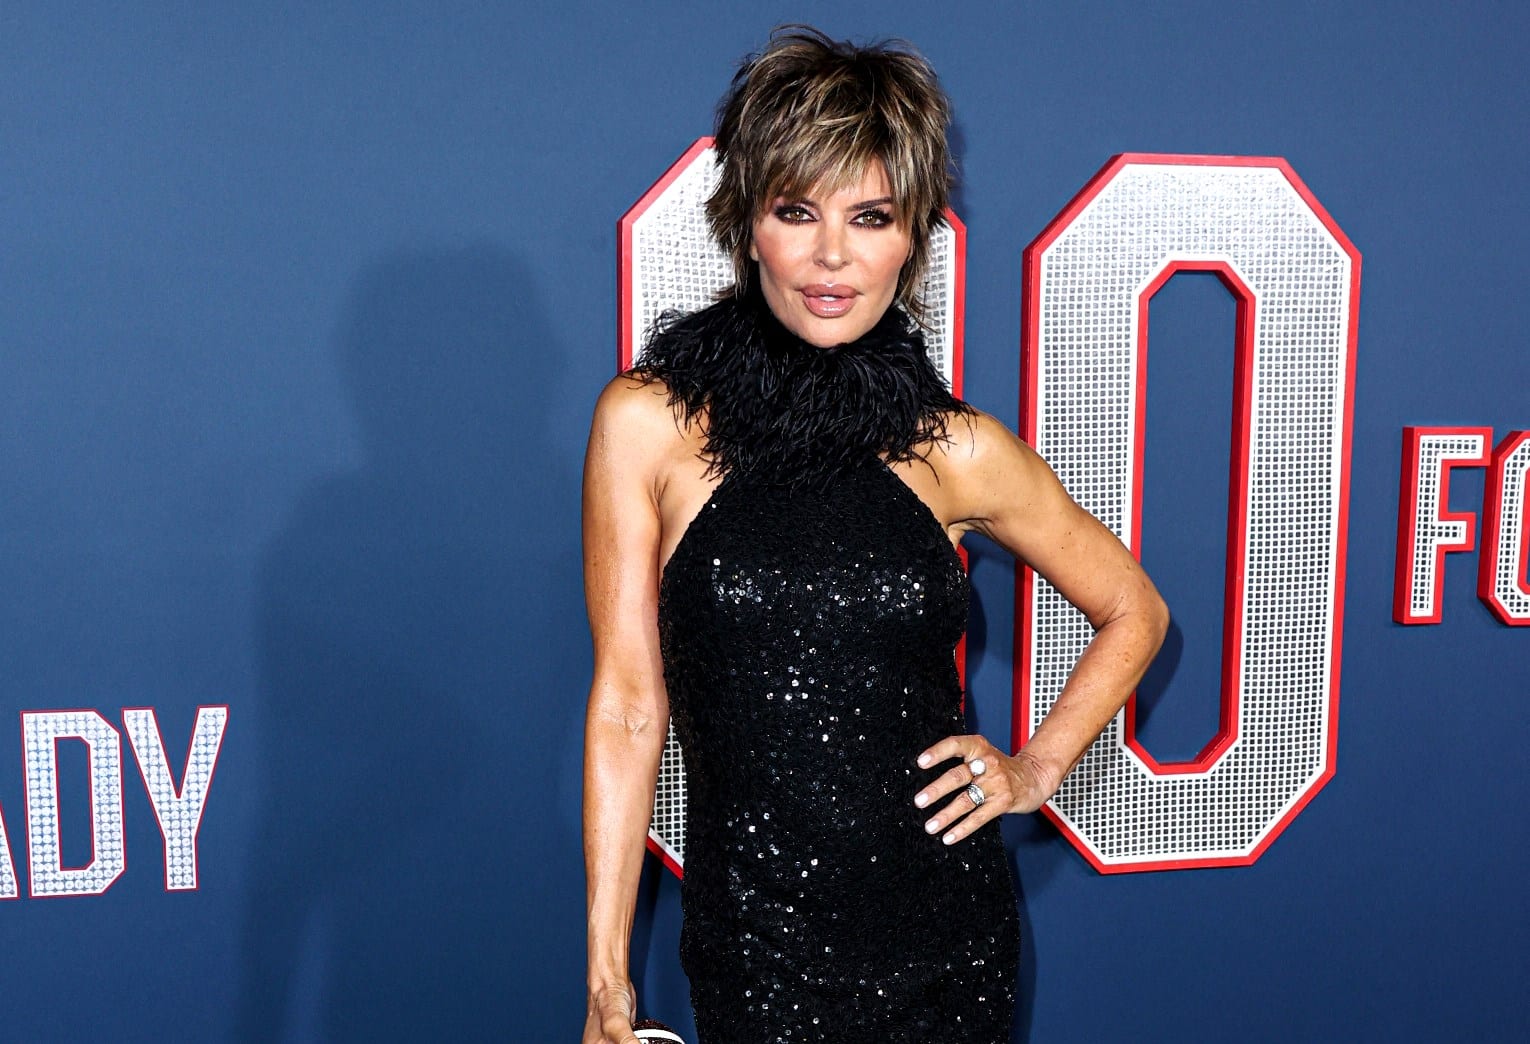 Lisa Rinna Denies Family is Getting Reality Show After RHOBH Exit and Shares Details Behind Pageboy Wig at Paris Fashion Week